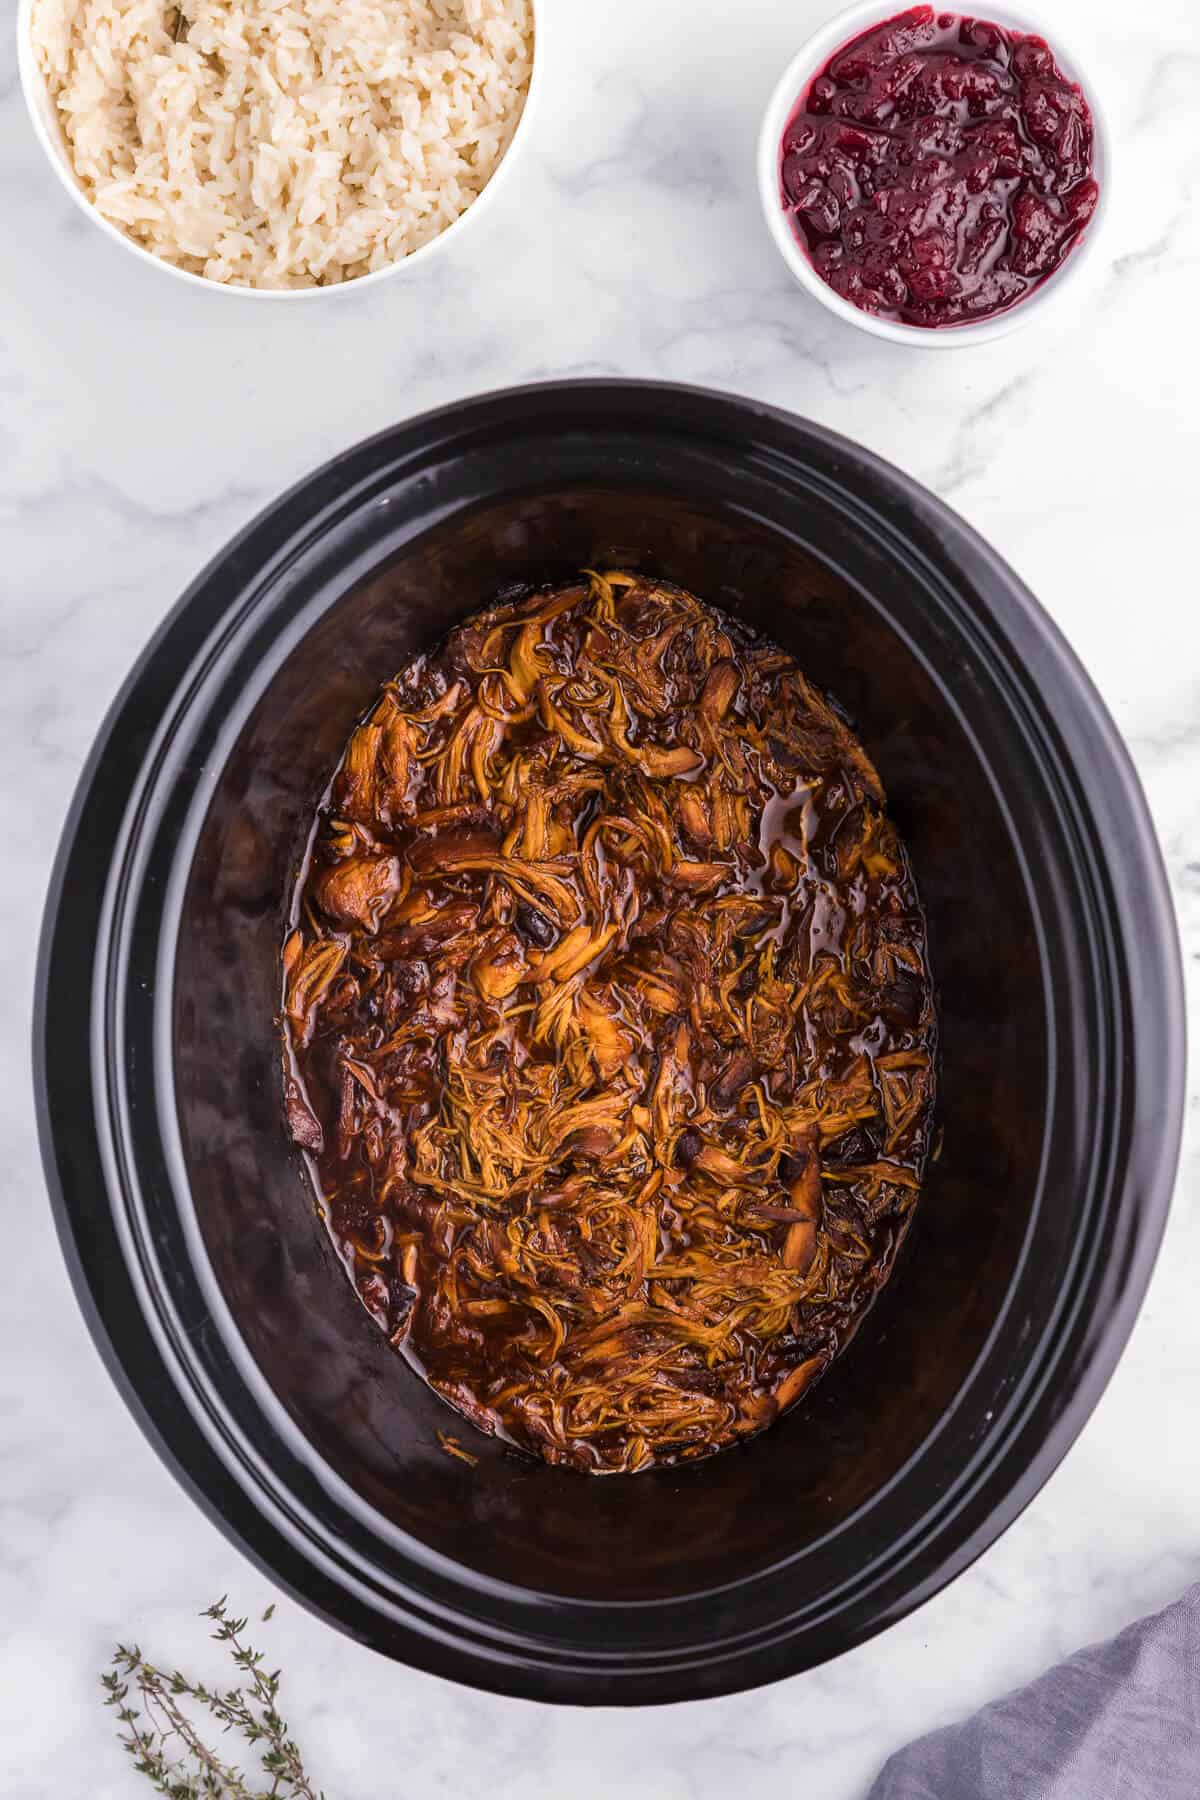 Slow Cooker Cranberry Chicken - Tender chicken breasts slow cooked with a sweet & savoury cranberry sauce flavoured with ginger and allspice.